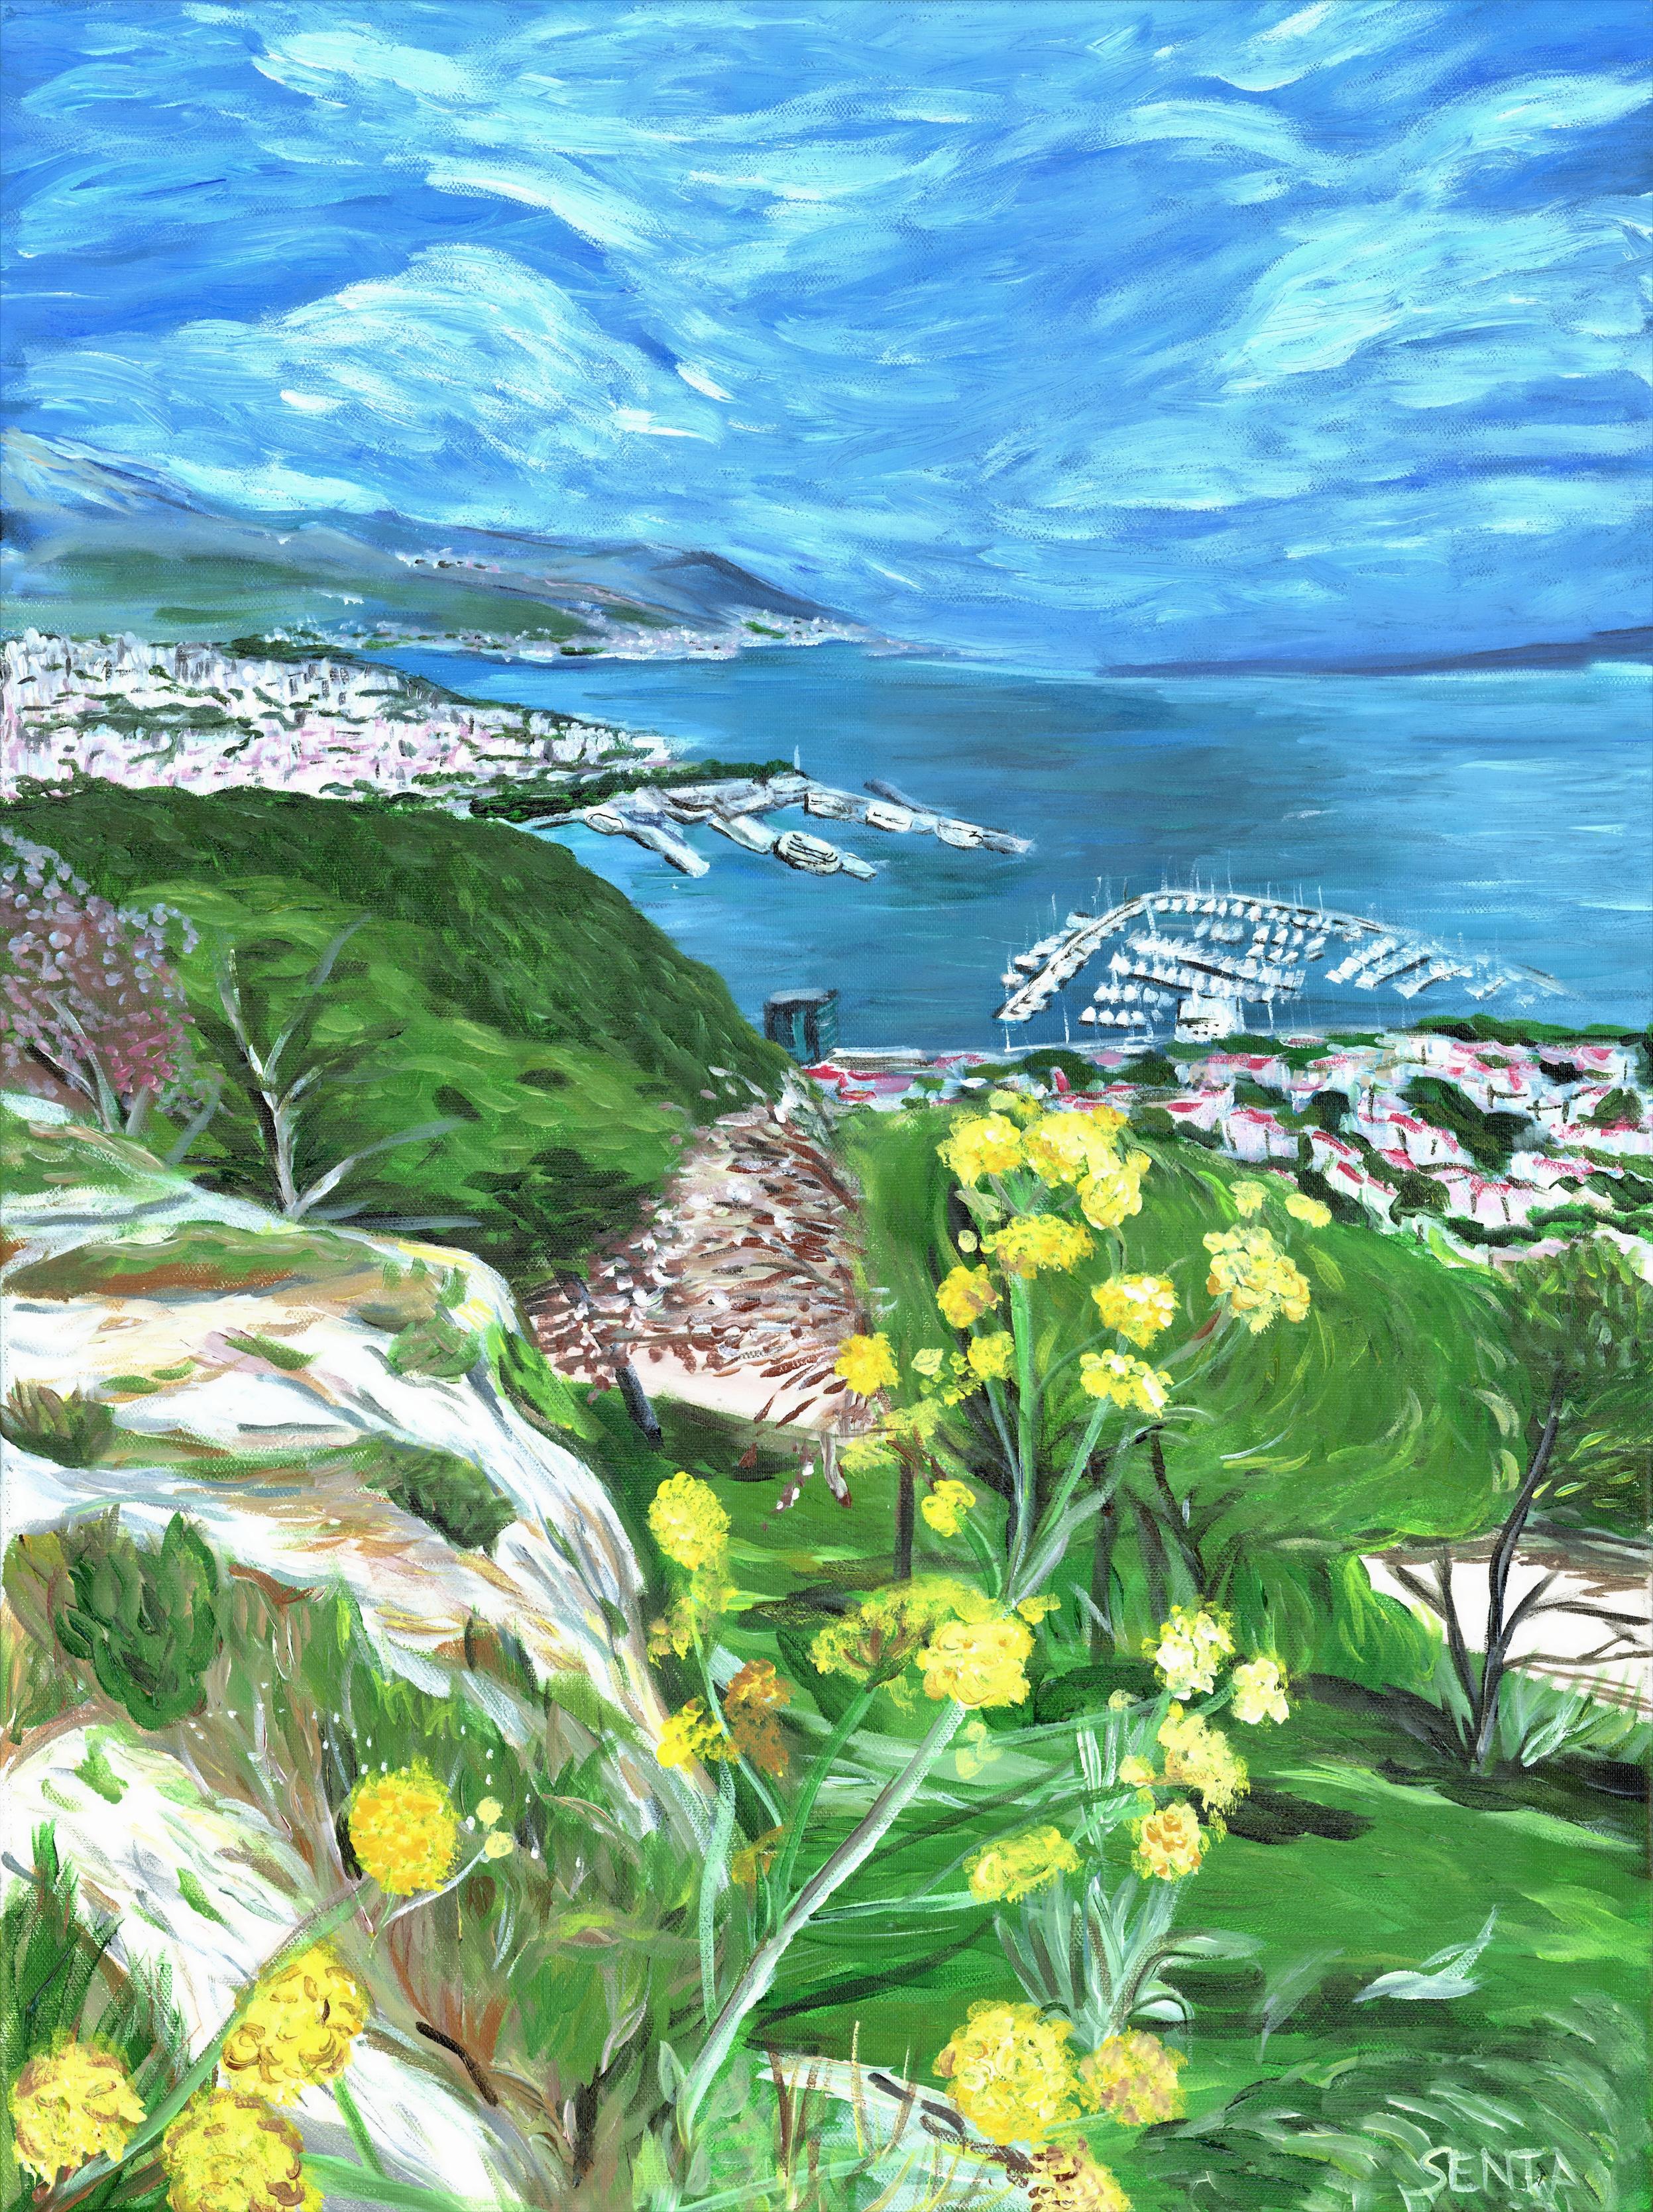 Dalmatia
18.0 x 24.0 x 0.75, 1.0 lbs 
Acrylic 
Hand signed by artist 

Artist's Commentary: 
"This is a great memory for me. This is based off a photo my husband took on our trip to Split, Croatia. He made me ride a bike up a mountain (it was a hill